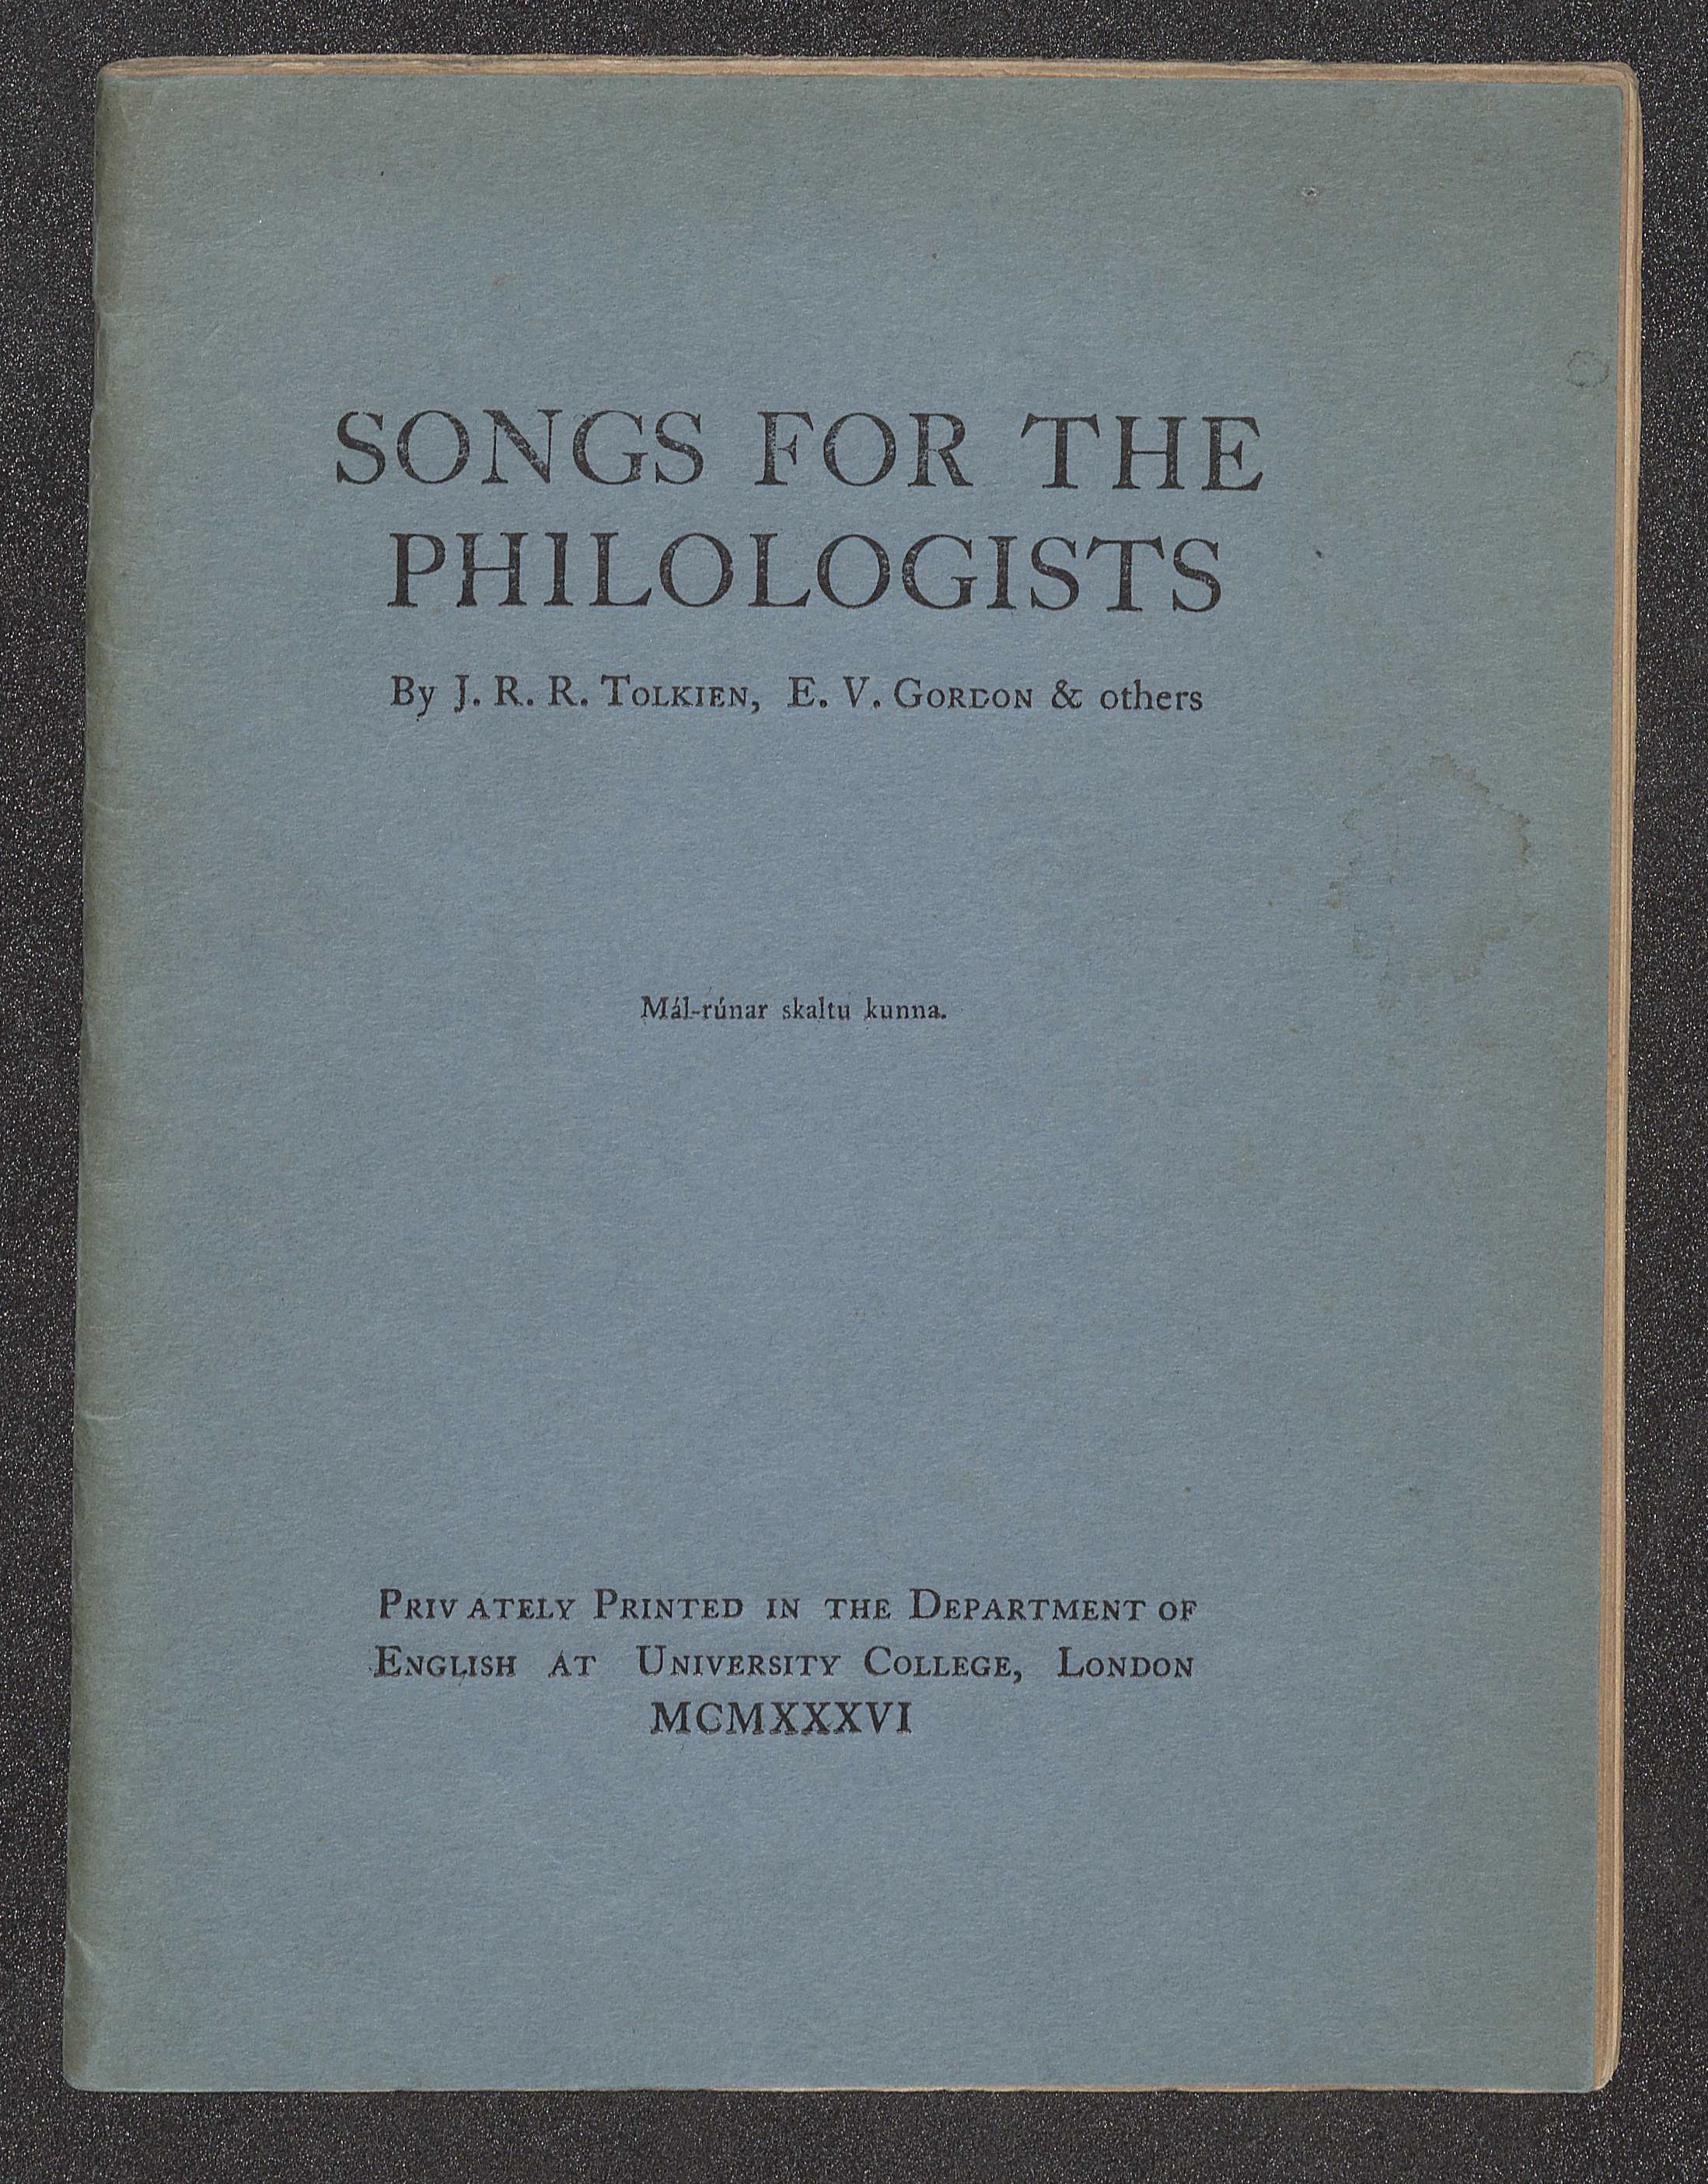 The front cover of Songs for the Philologists, which lists Tolkien first among the volume's authors.  PR6039.O32 S65 1936, Gift of Joan Kellogg, 2013.